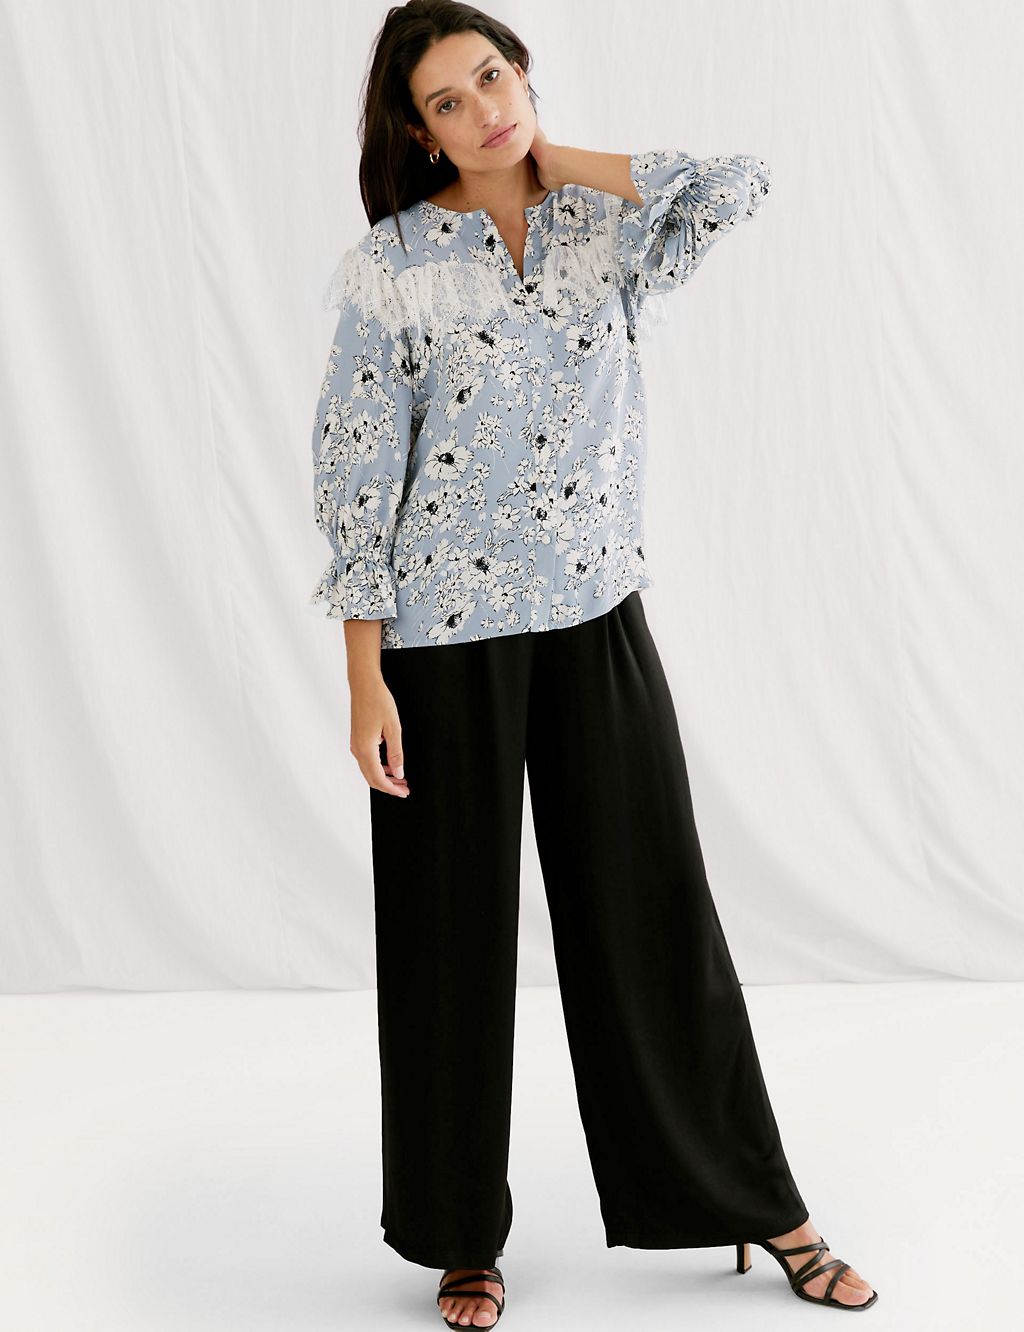 Sheer Floral Lace Detail 3/4 Sleeve Blouse 7 of 7